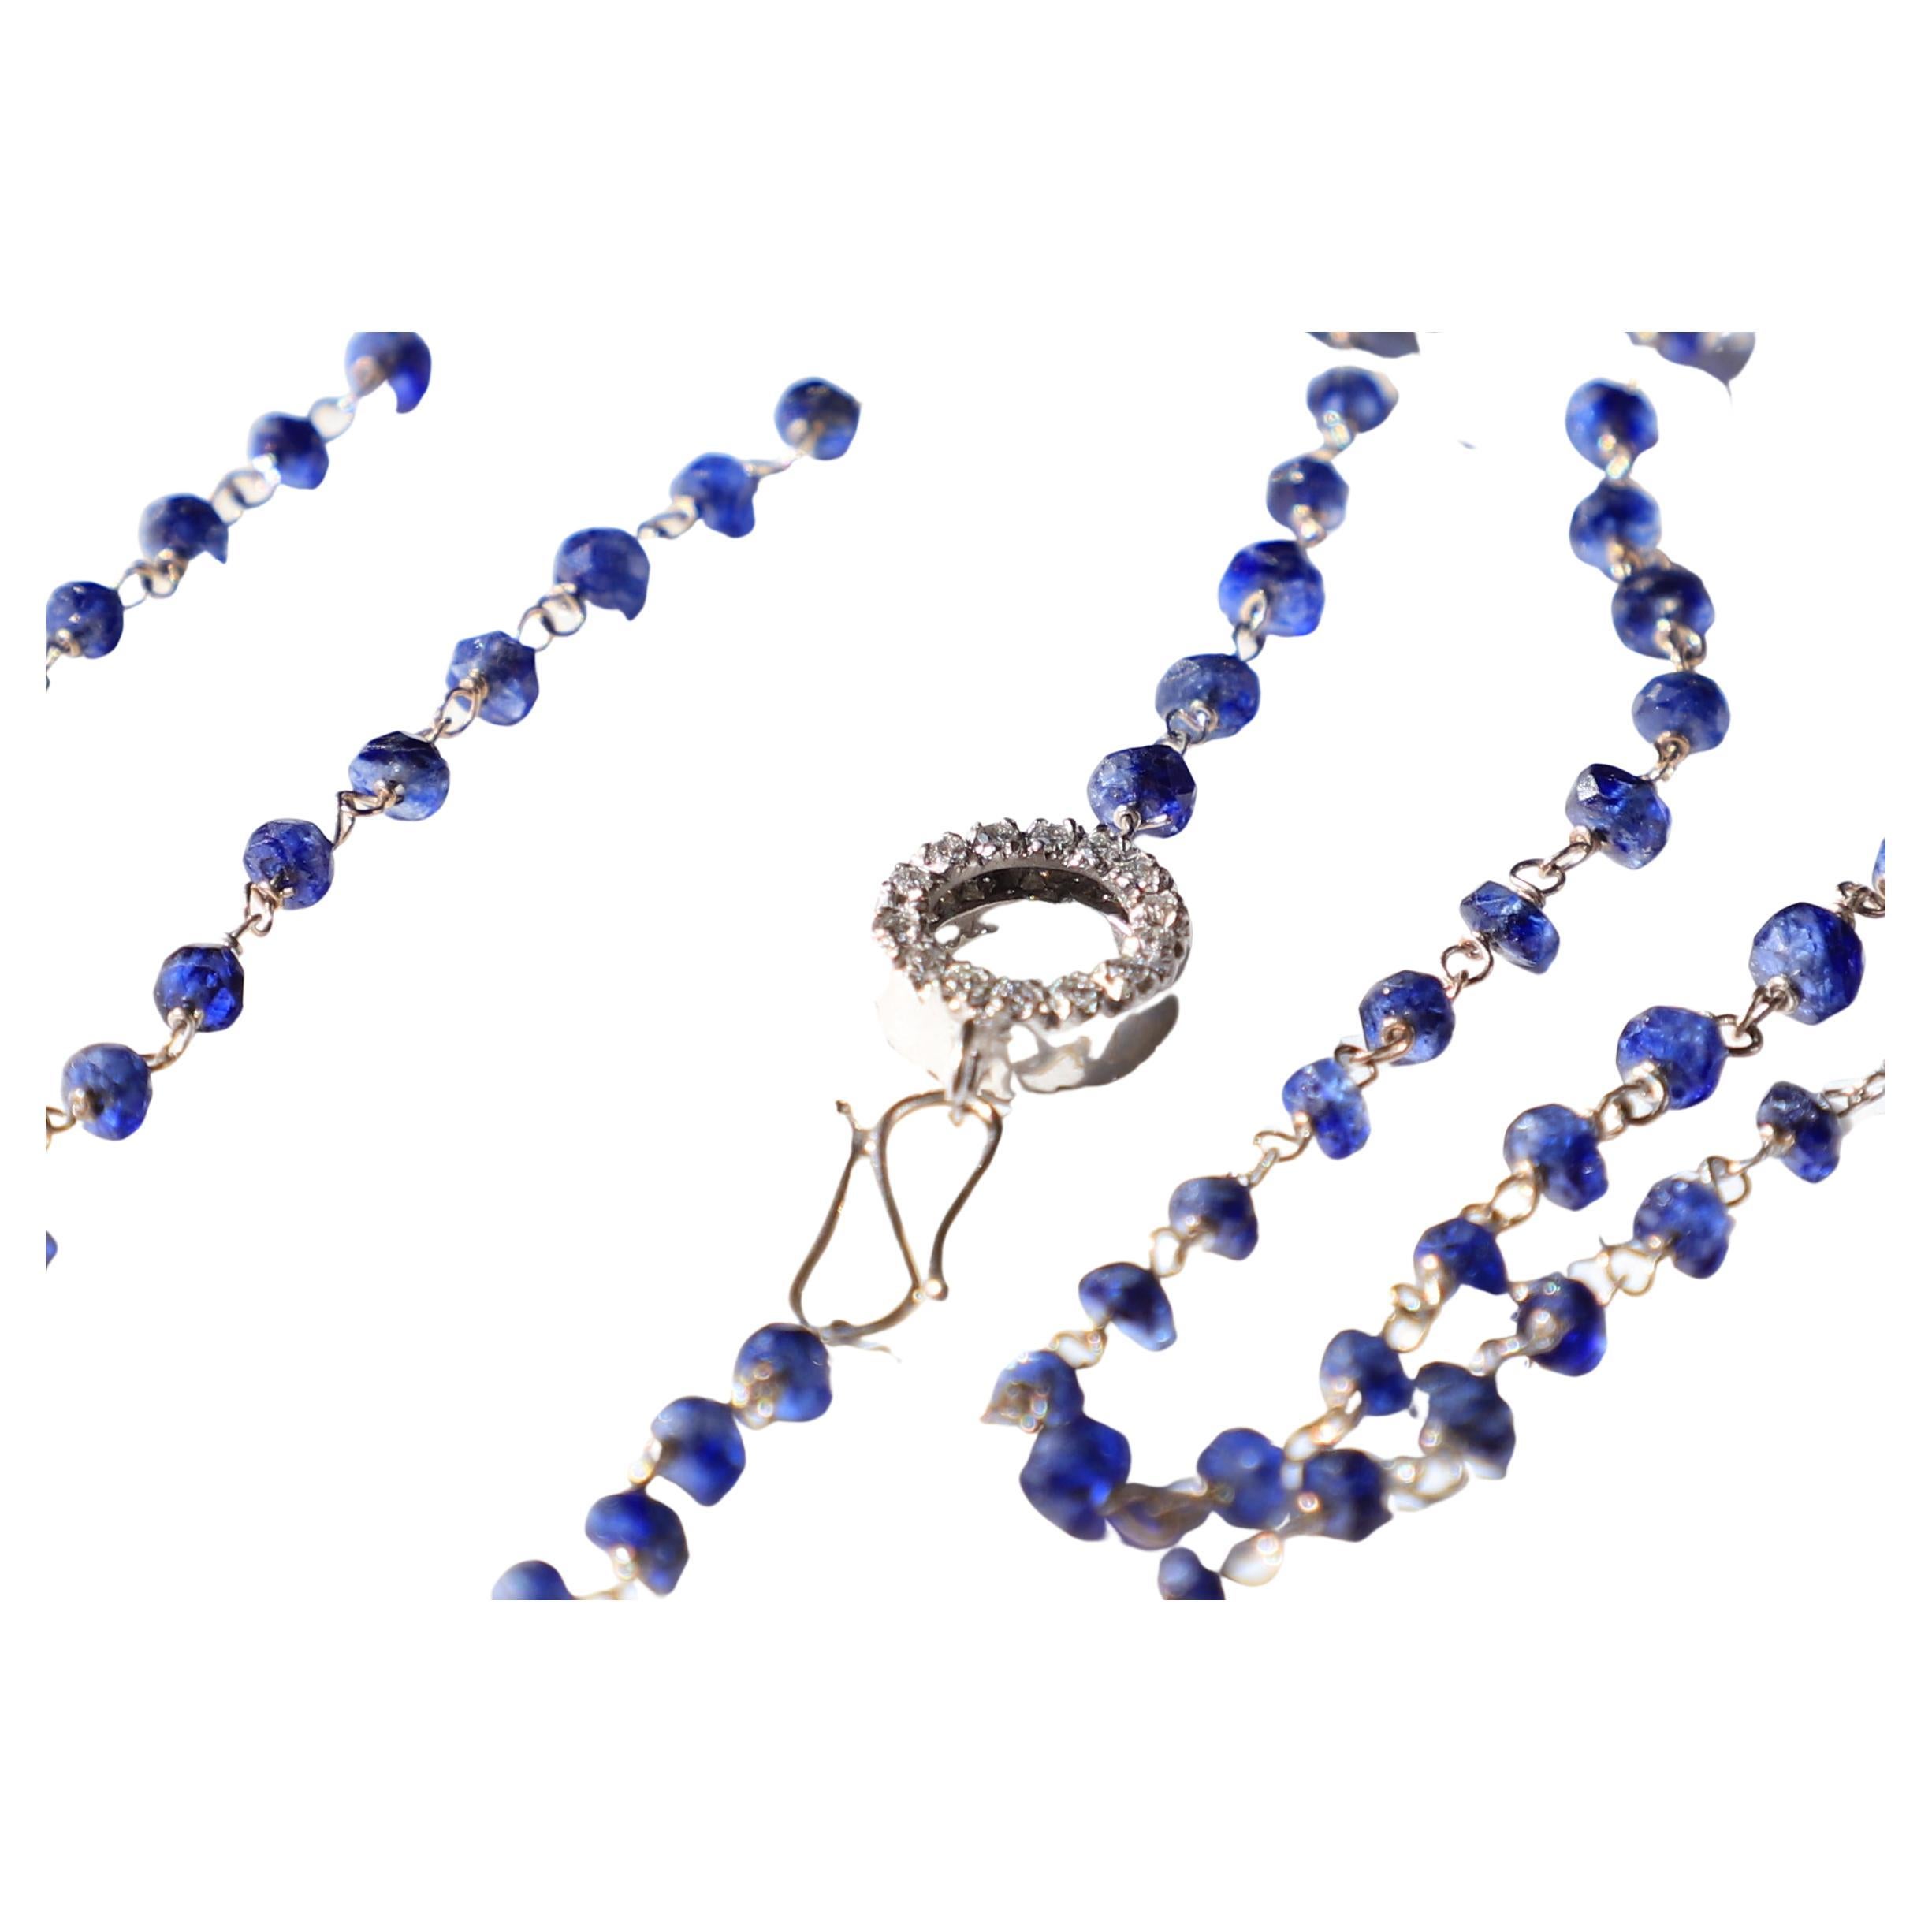 22.2 Carat Sapphire 0.44 Carat White Diamond Handcrafted Beaded 18KGold Necklace